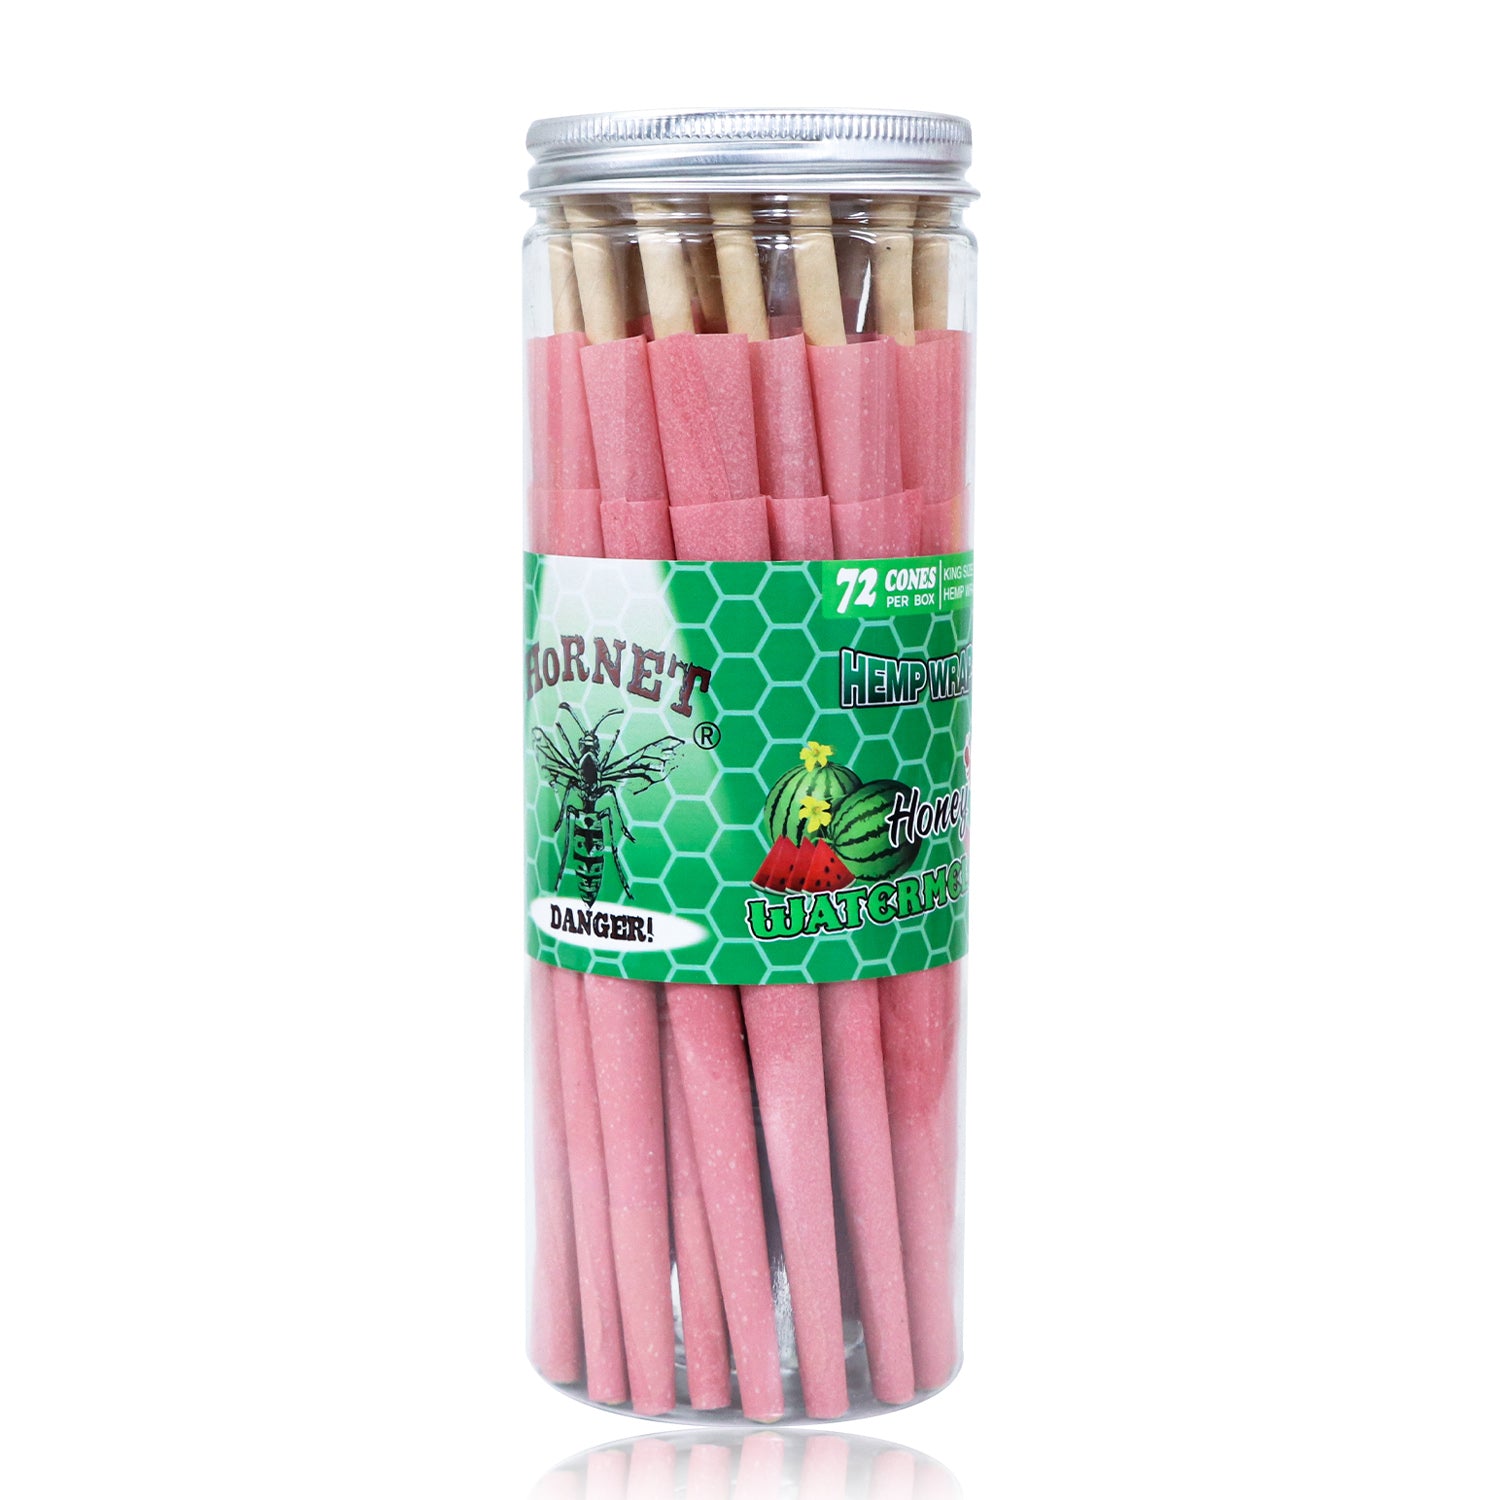 HORNET Watermelon Flavored Pink Pre Rolled Cones, King Size Pre Rolled Rolling Paper with tips, Slow Burning Rolling Cones & load, 72 PCS / Jar